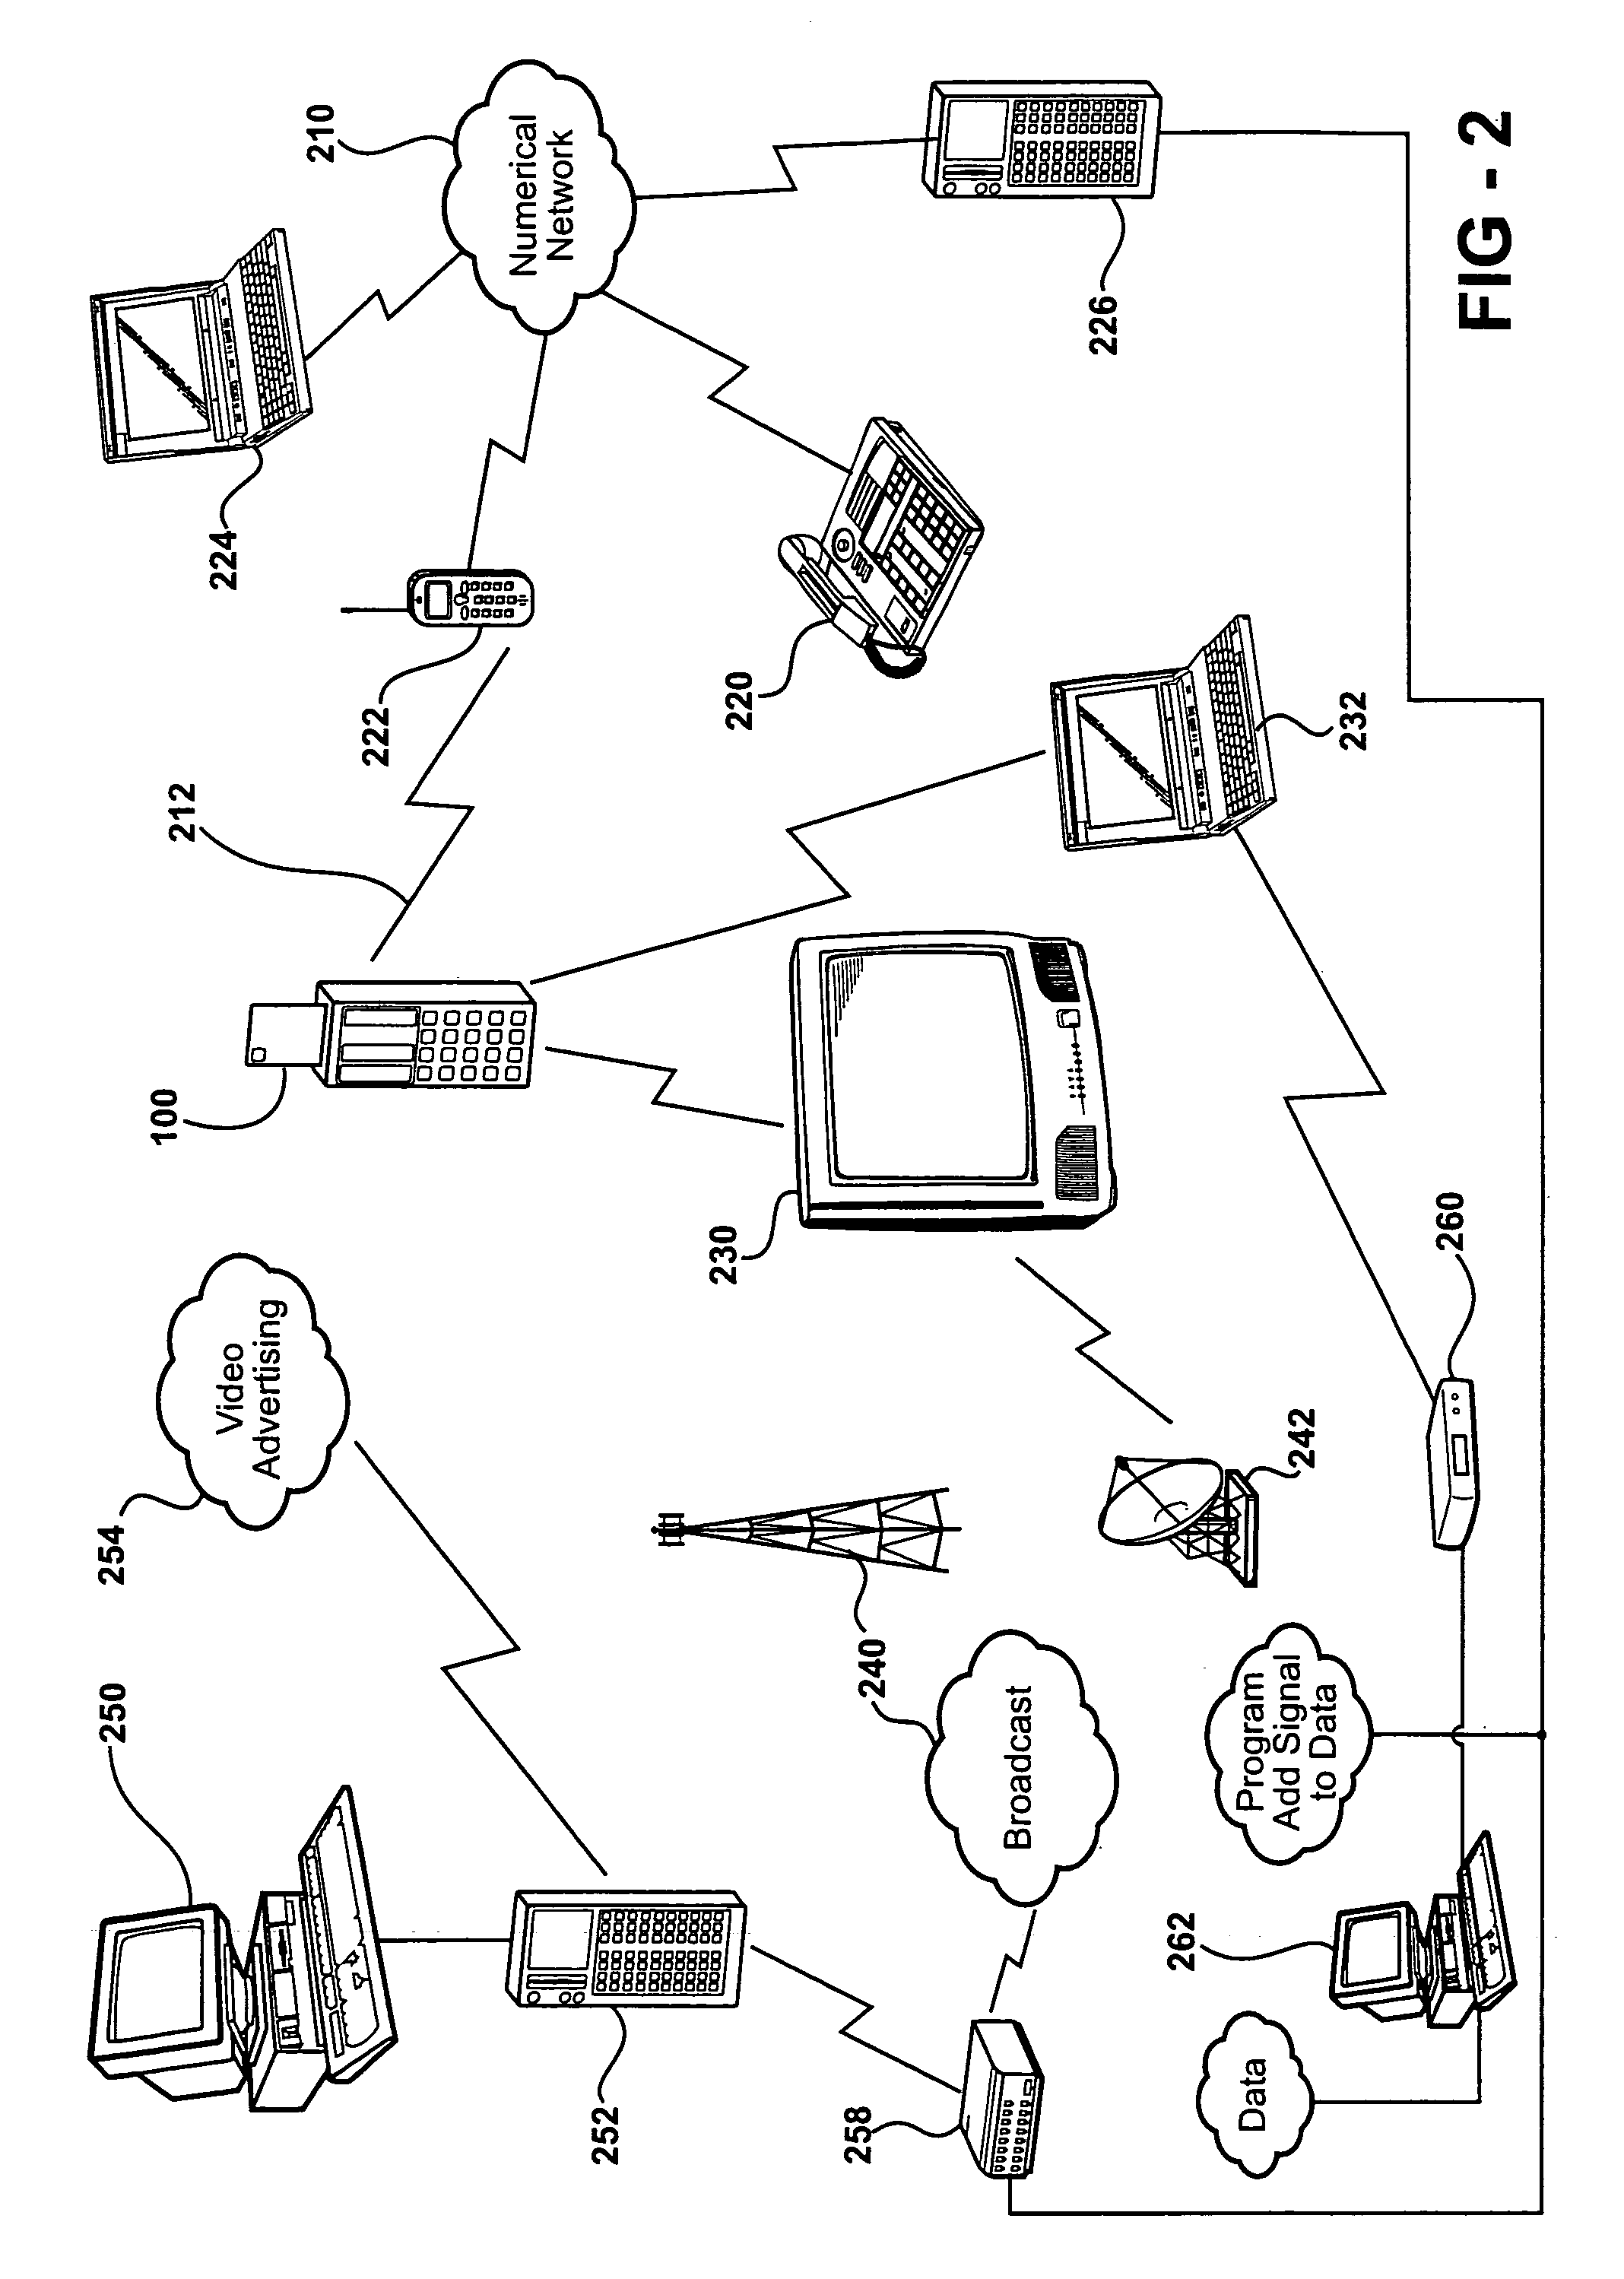 Method and apparatus for authenticating a shipping transaction